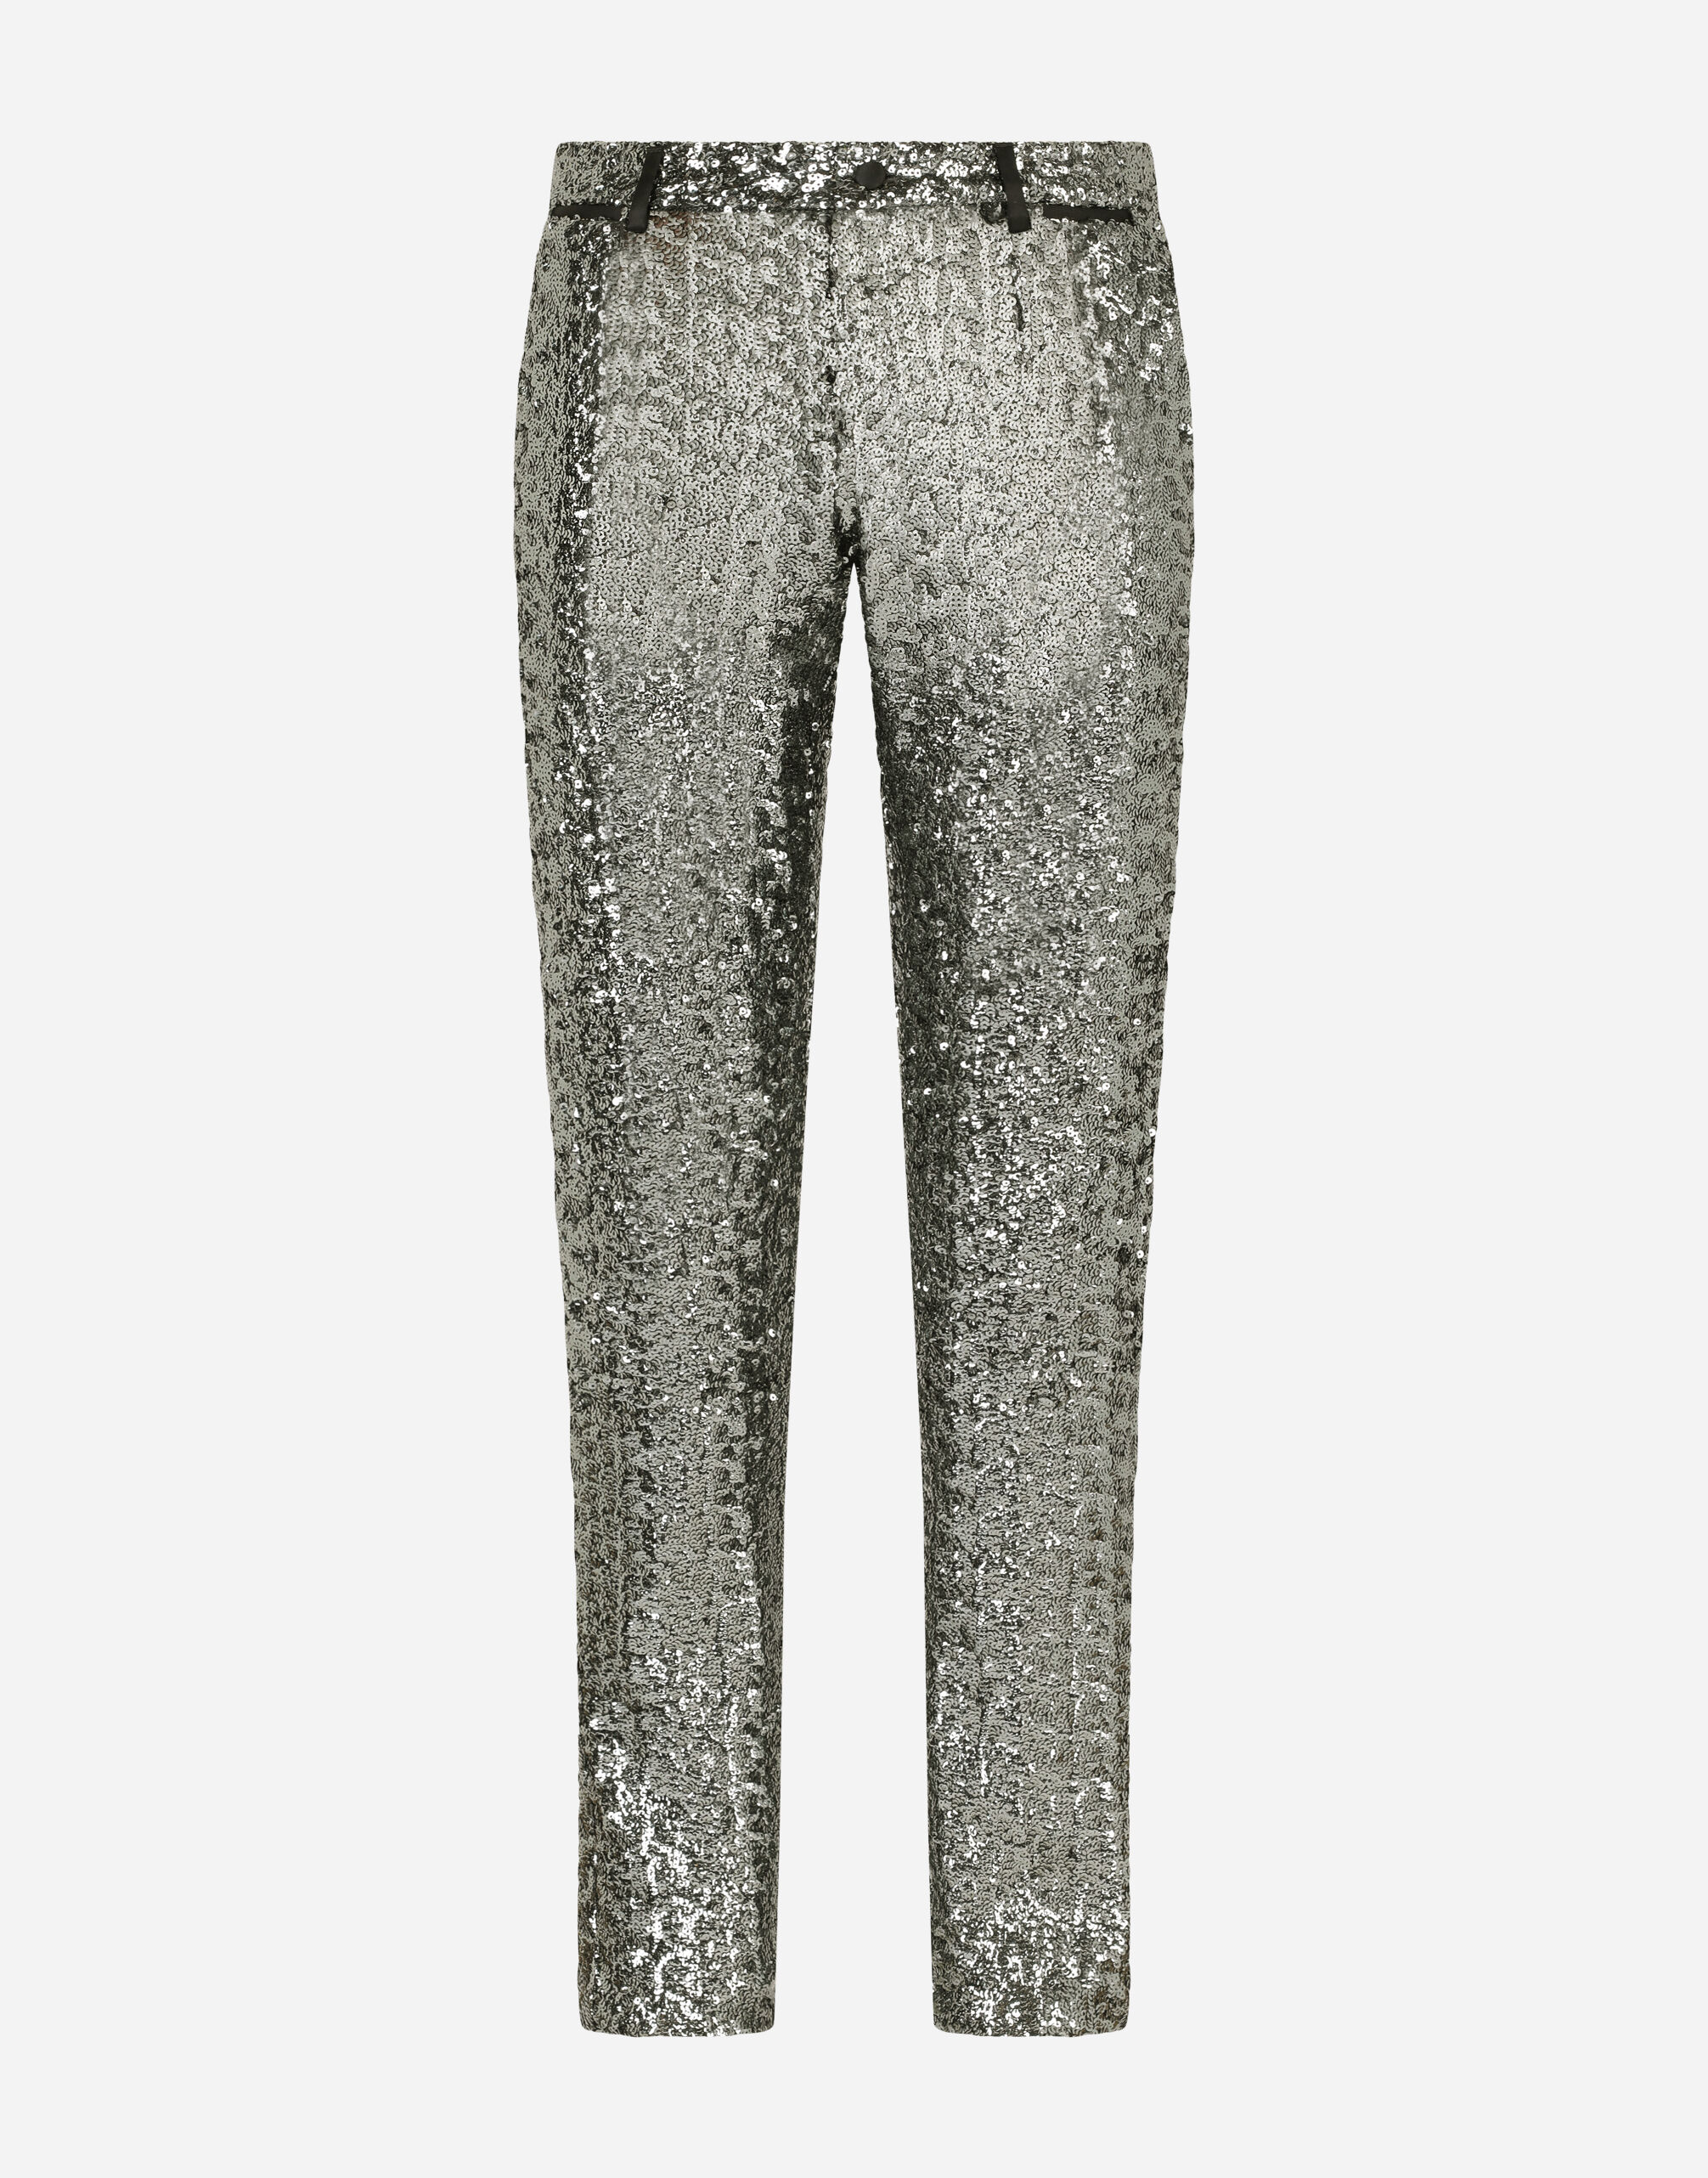 Dolce & Gabbana Tailored sequined pants Black G4HXATG7ZXD